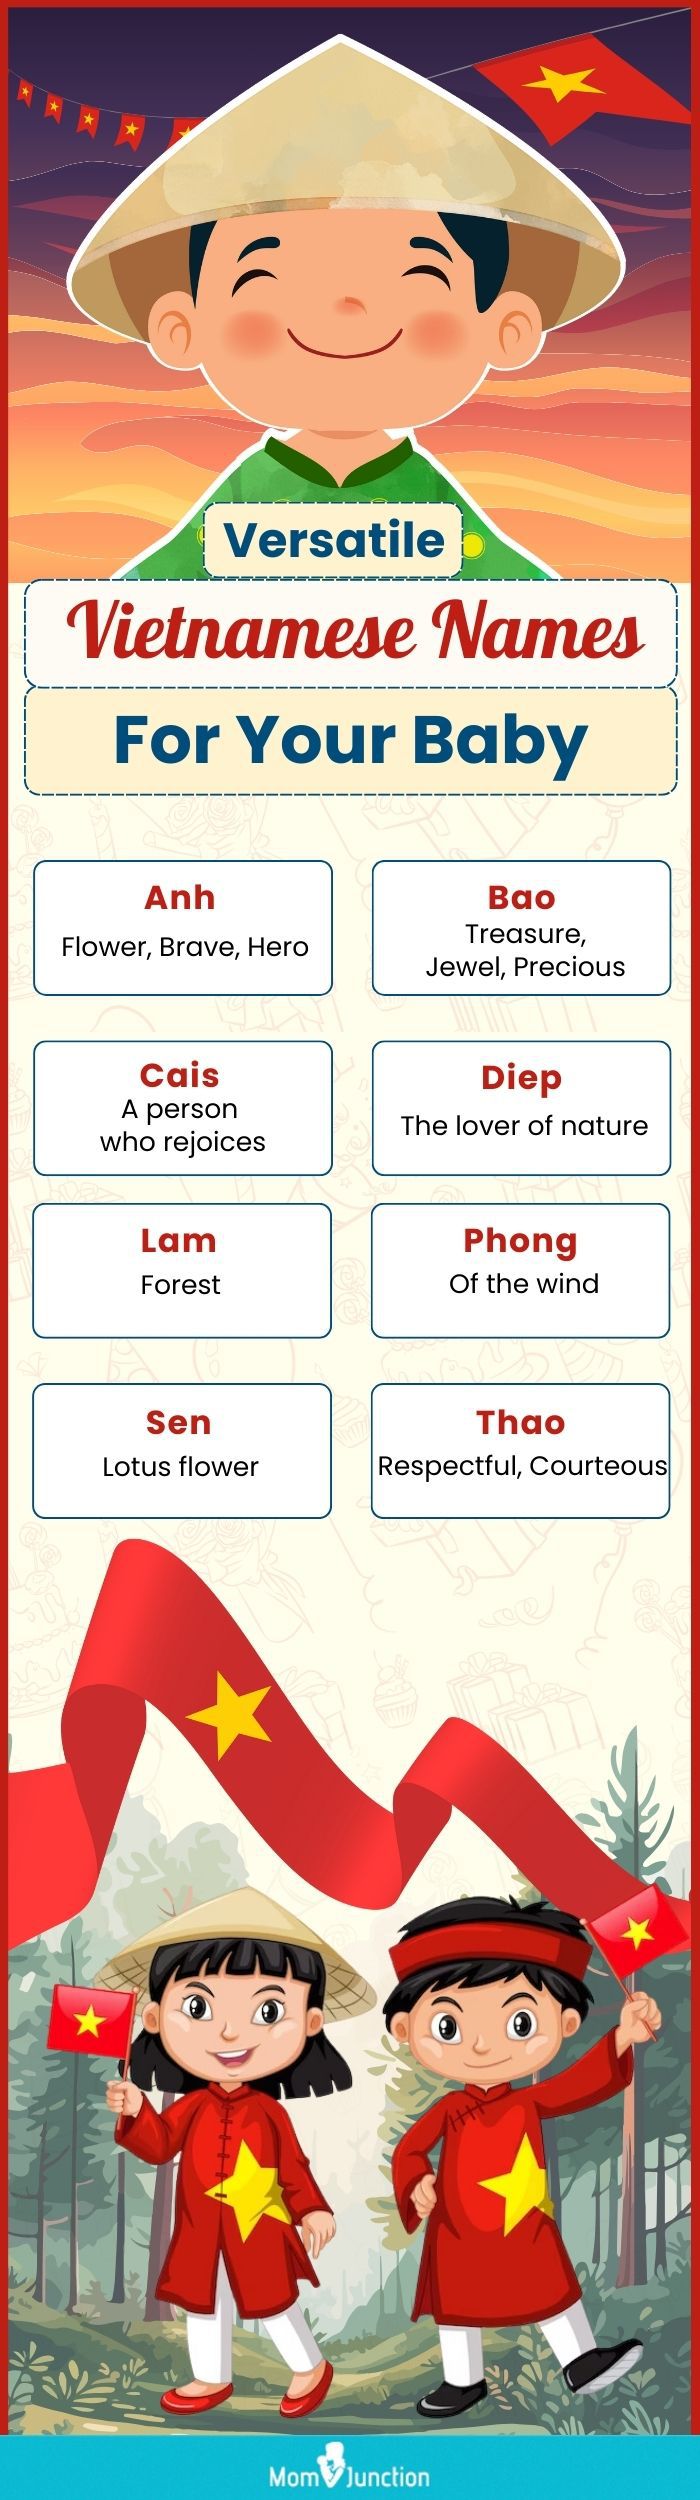 versatile vietnamese names for your baby (infographic)